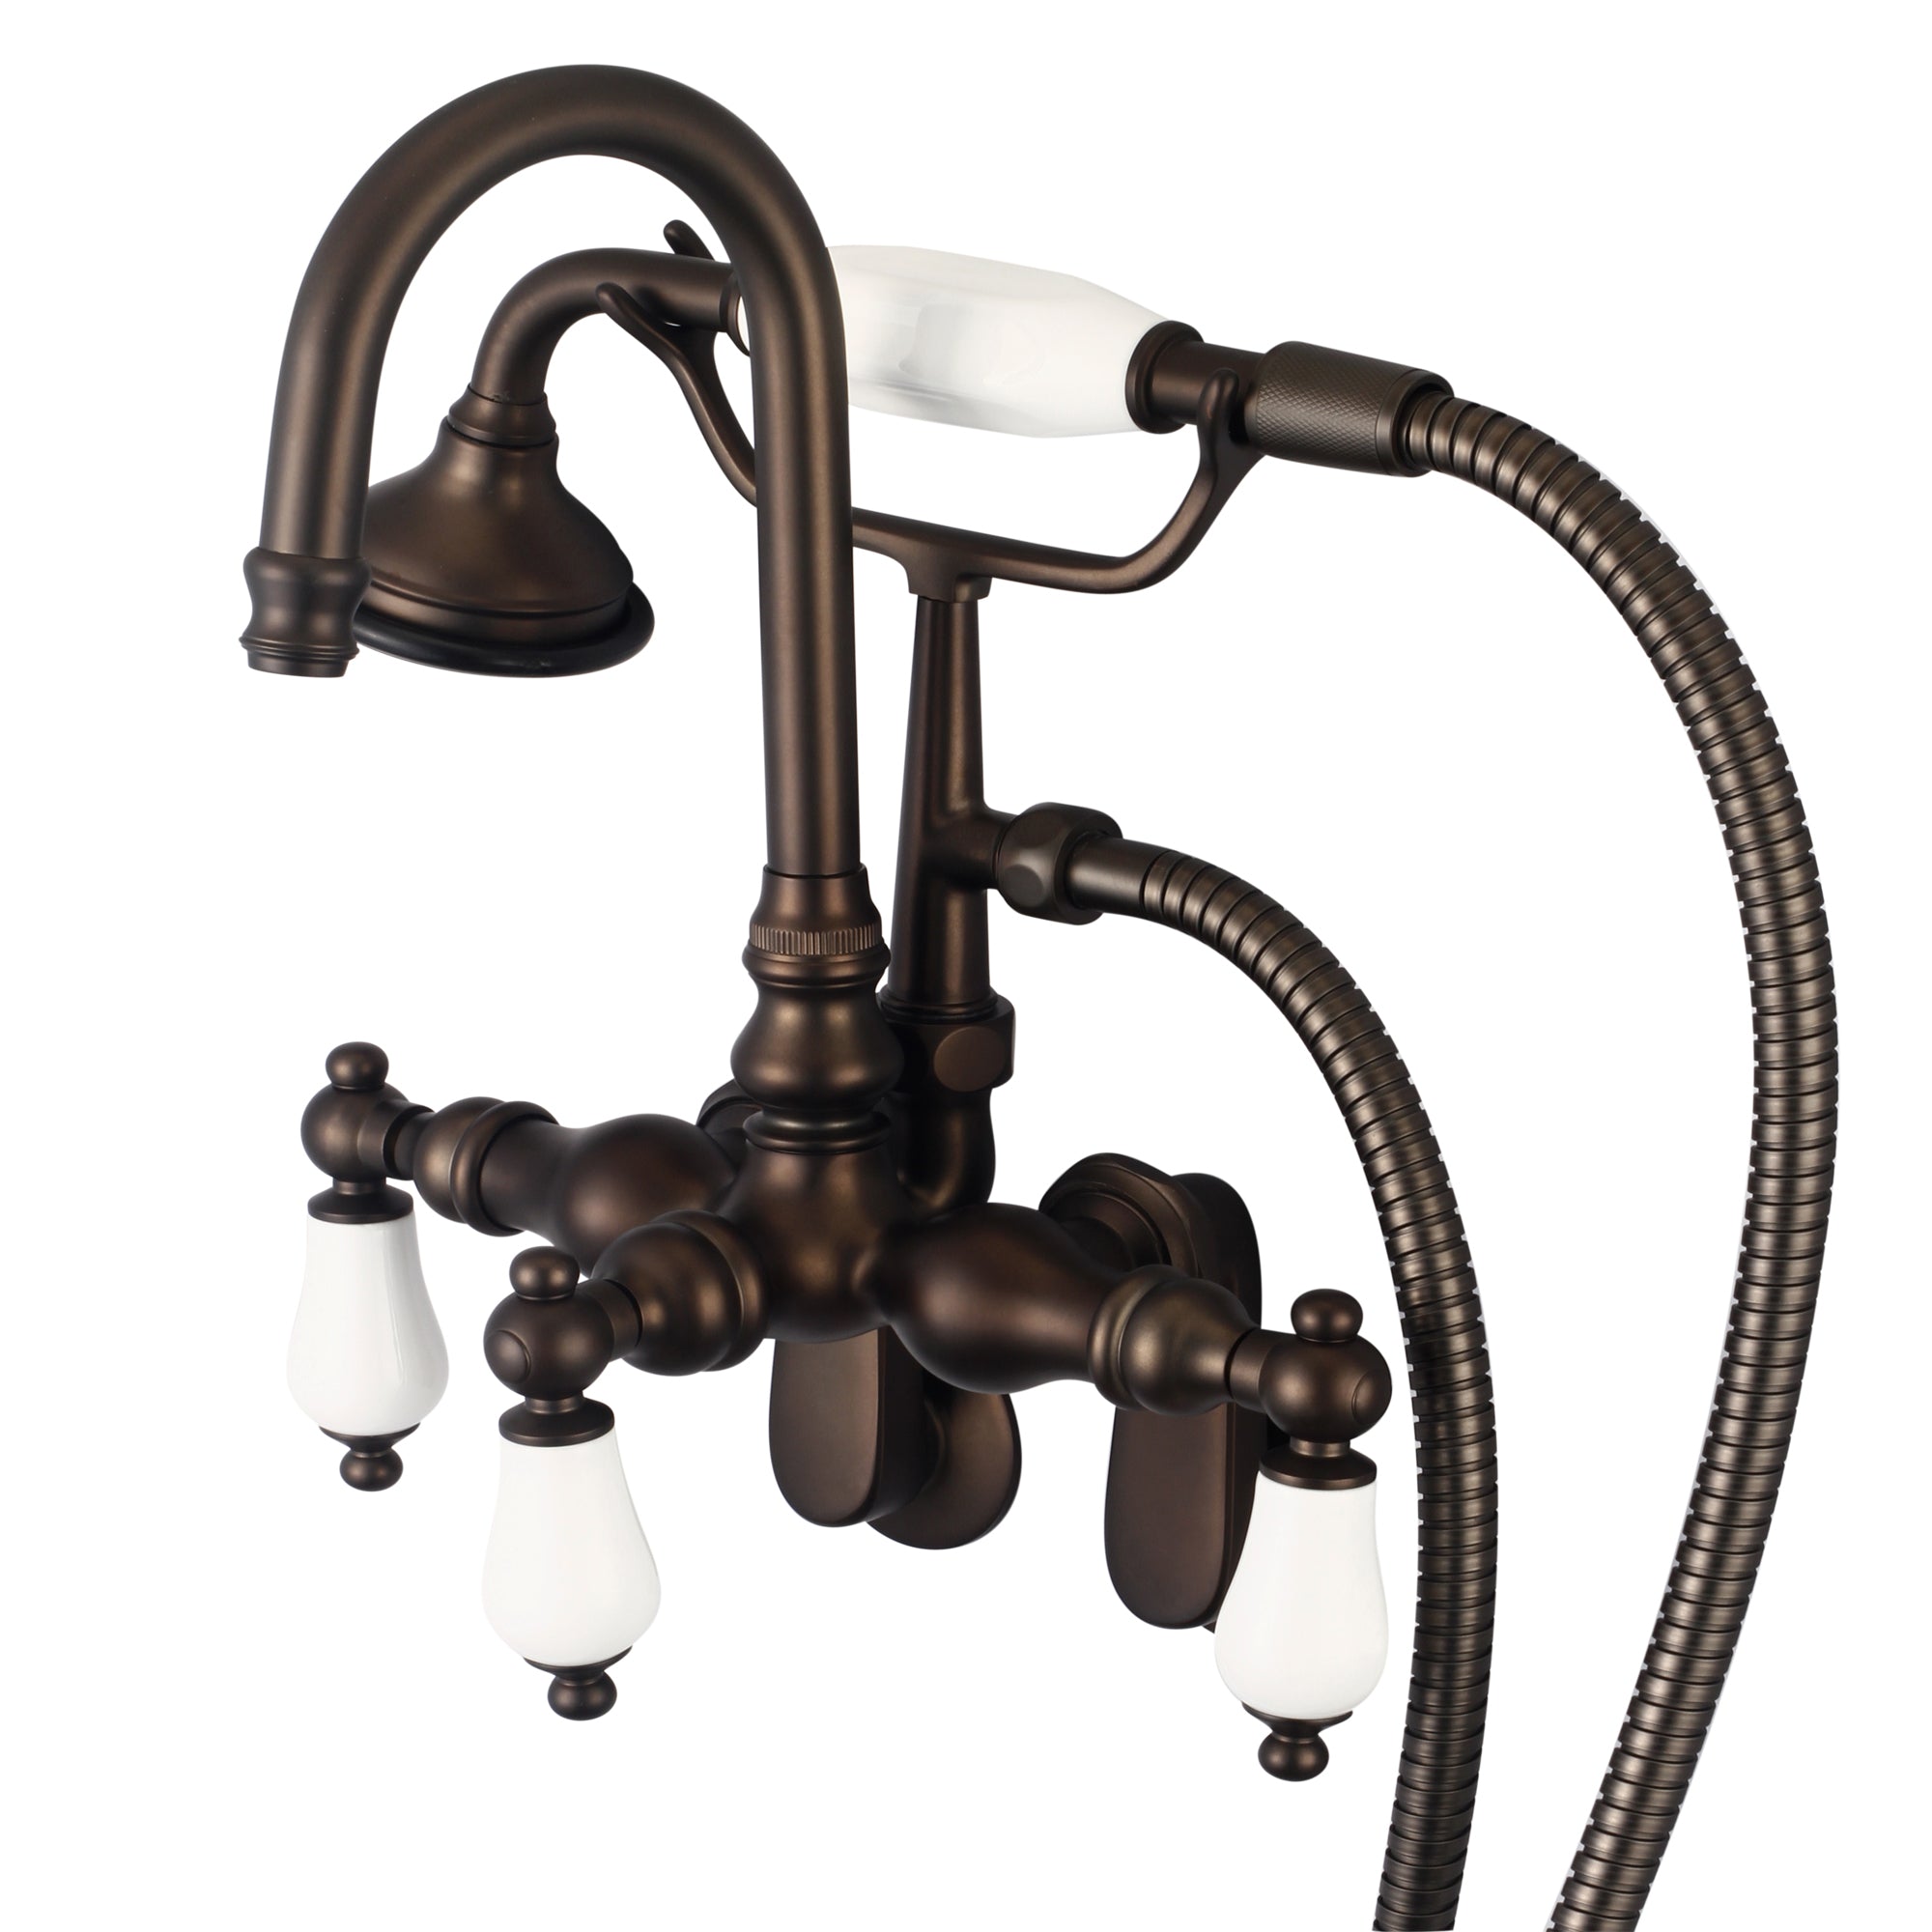 Water Creation | Vintage Classic Adjustable Spread Wall Mount Tub Faucet With Gooseneck Spout, Swivel Wall Connector & Handheld Shower in Oil-rubbed Bronze Finish Finish With Porcelain Lever Handles Without labels | F6-0011-03-PL